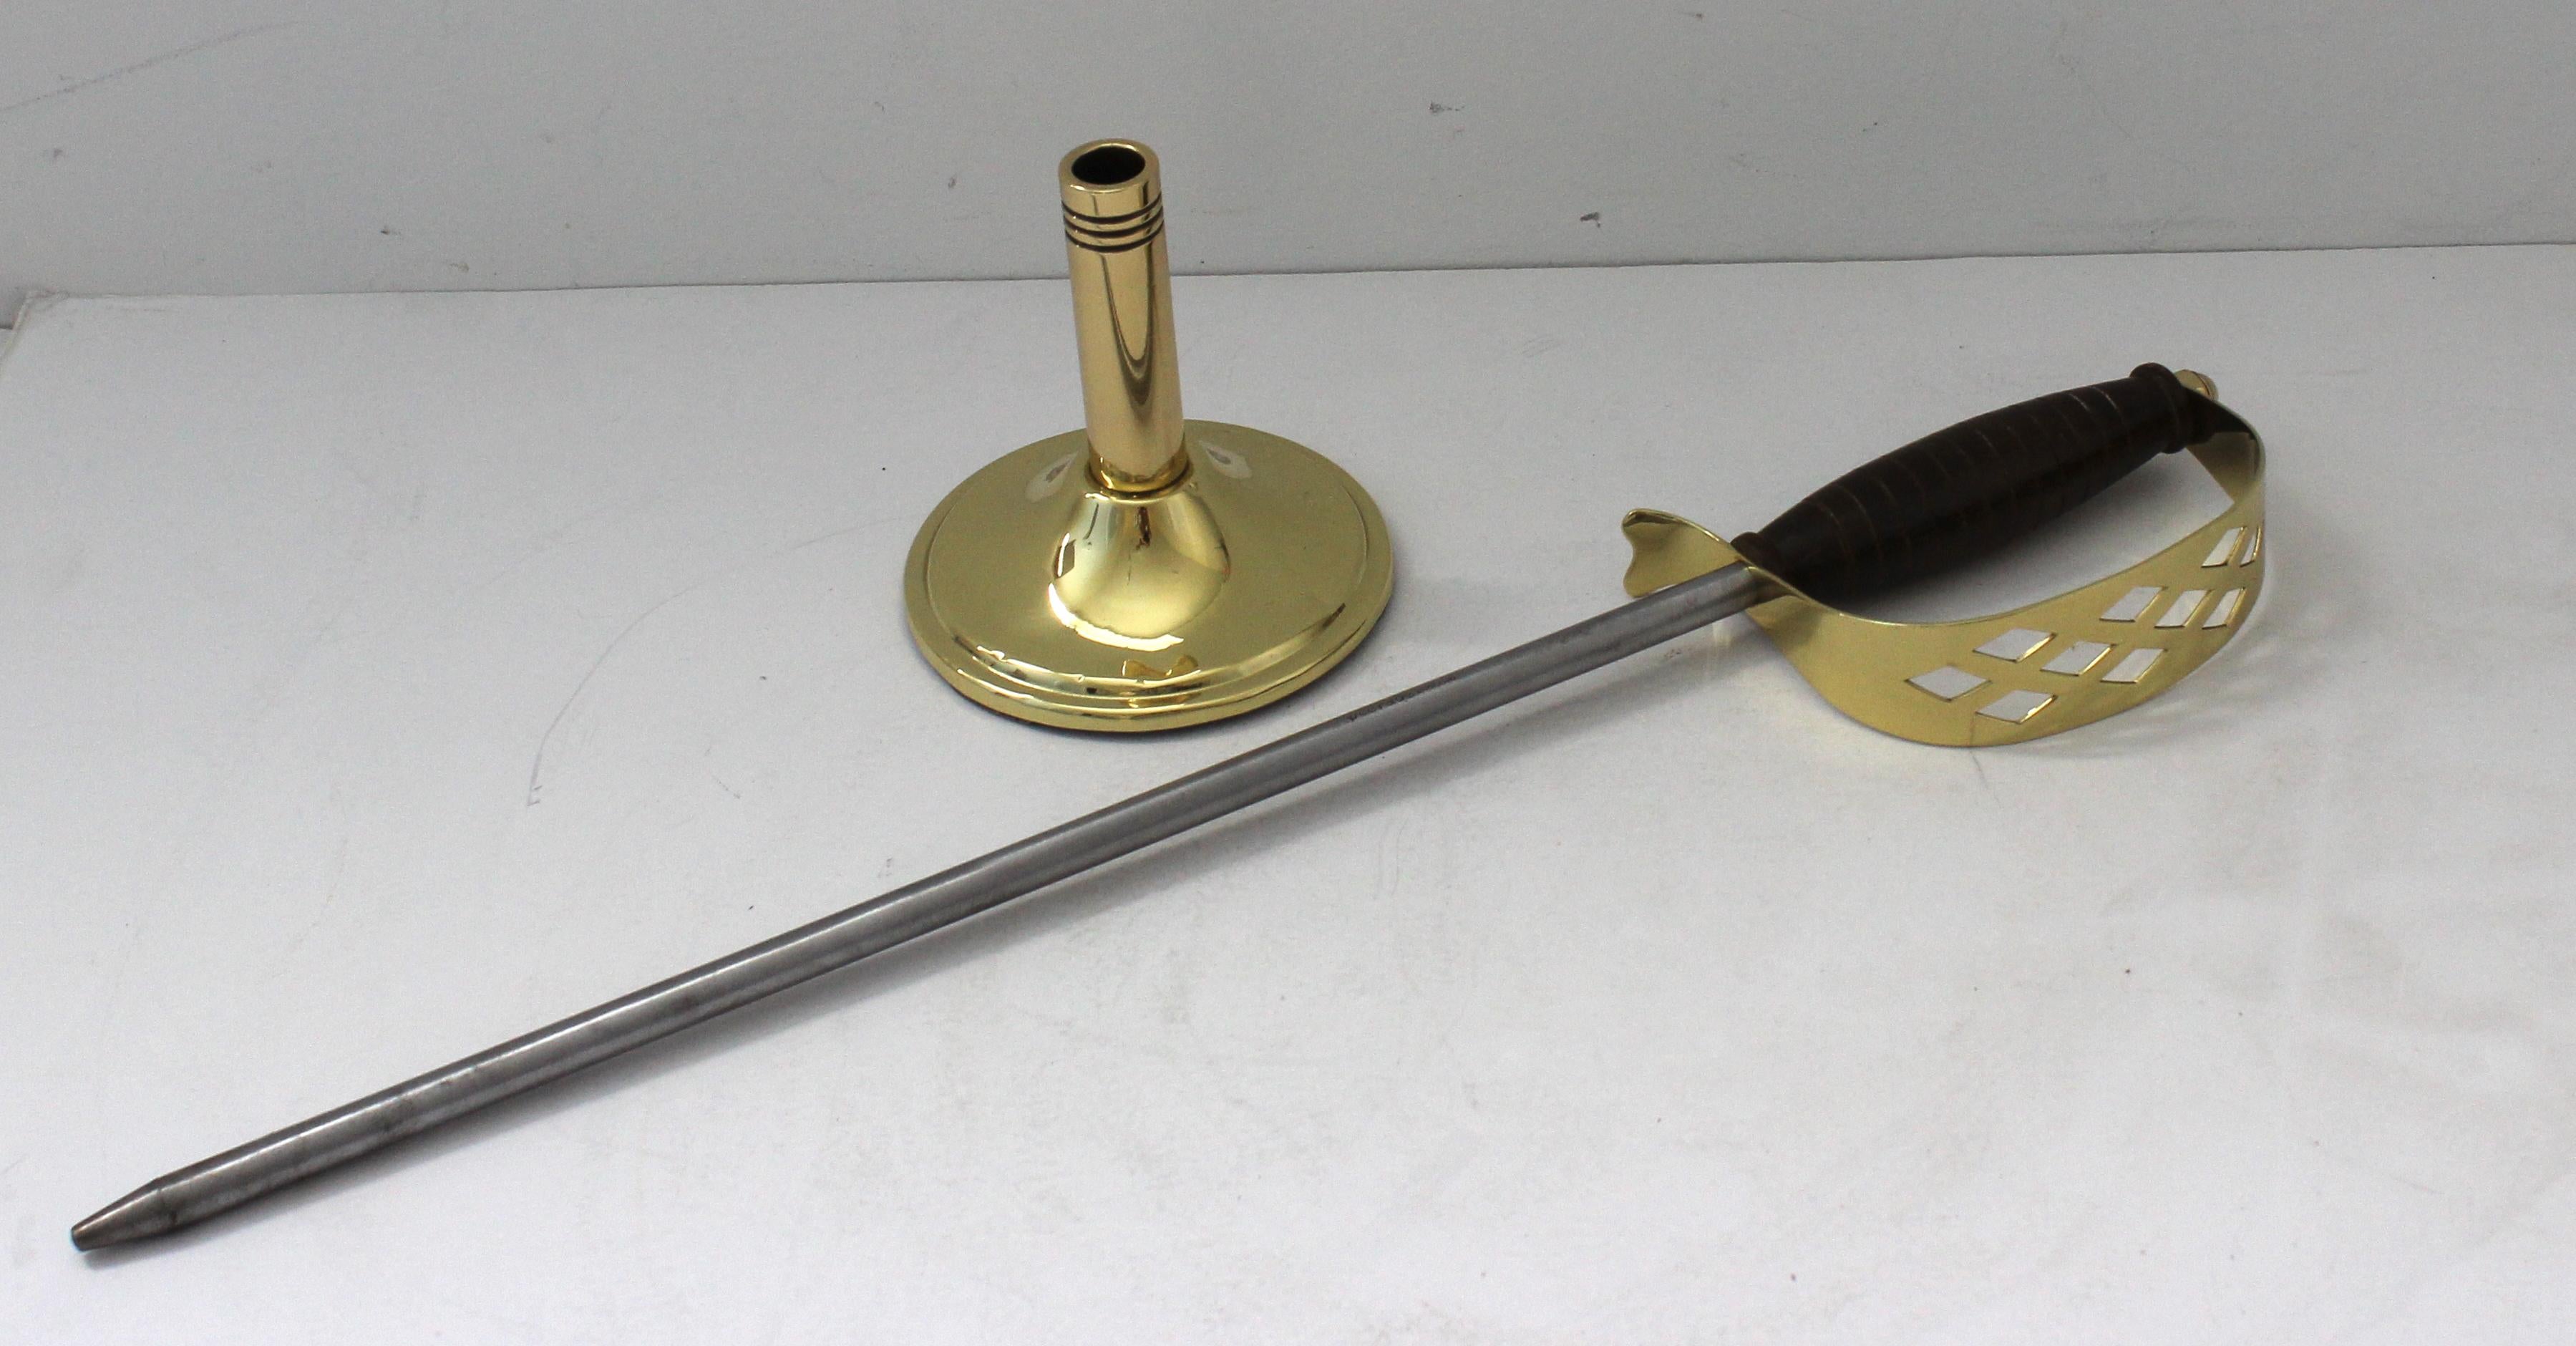 This stylish and chic English sword-form fireplace poker dates to the 1920s-1930s and was created by Peerage.

Note: The piece has been professionally polished and the brass also has a clear lacquer coat, so no tarnishing. 

Note: Marked Peerage